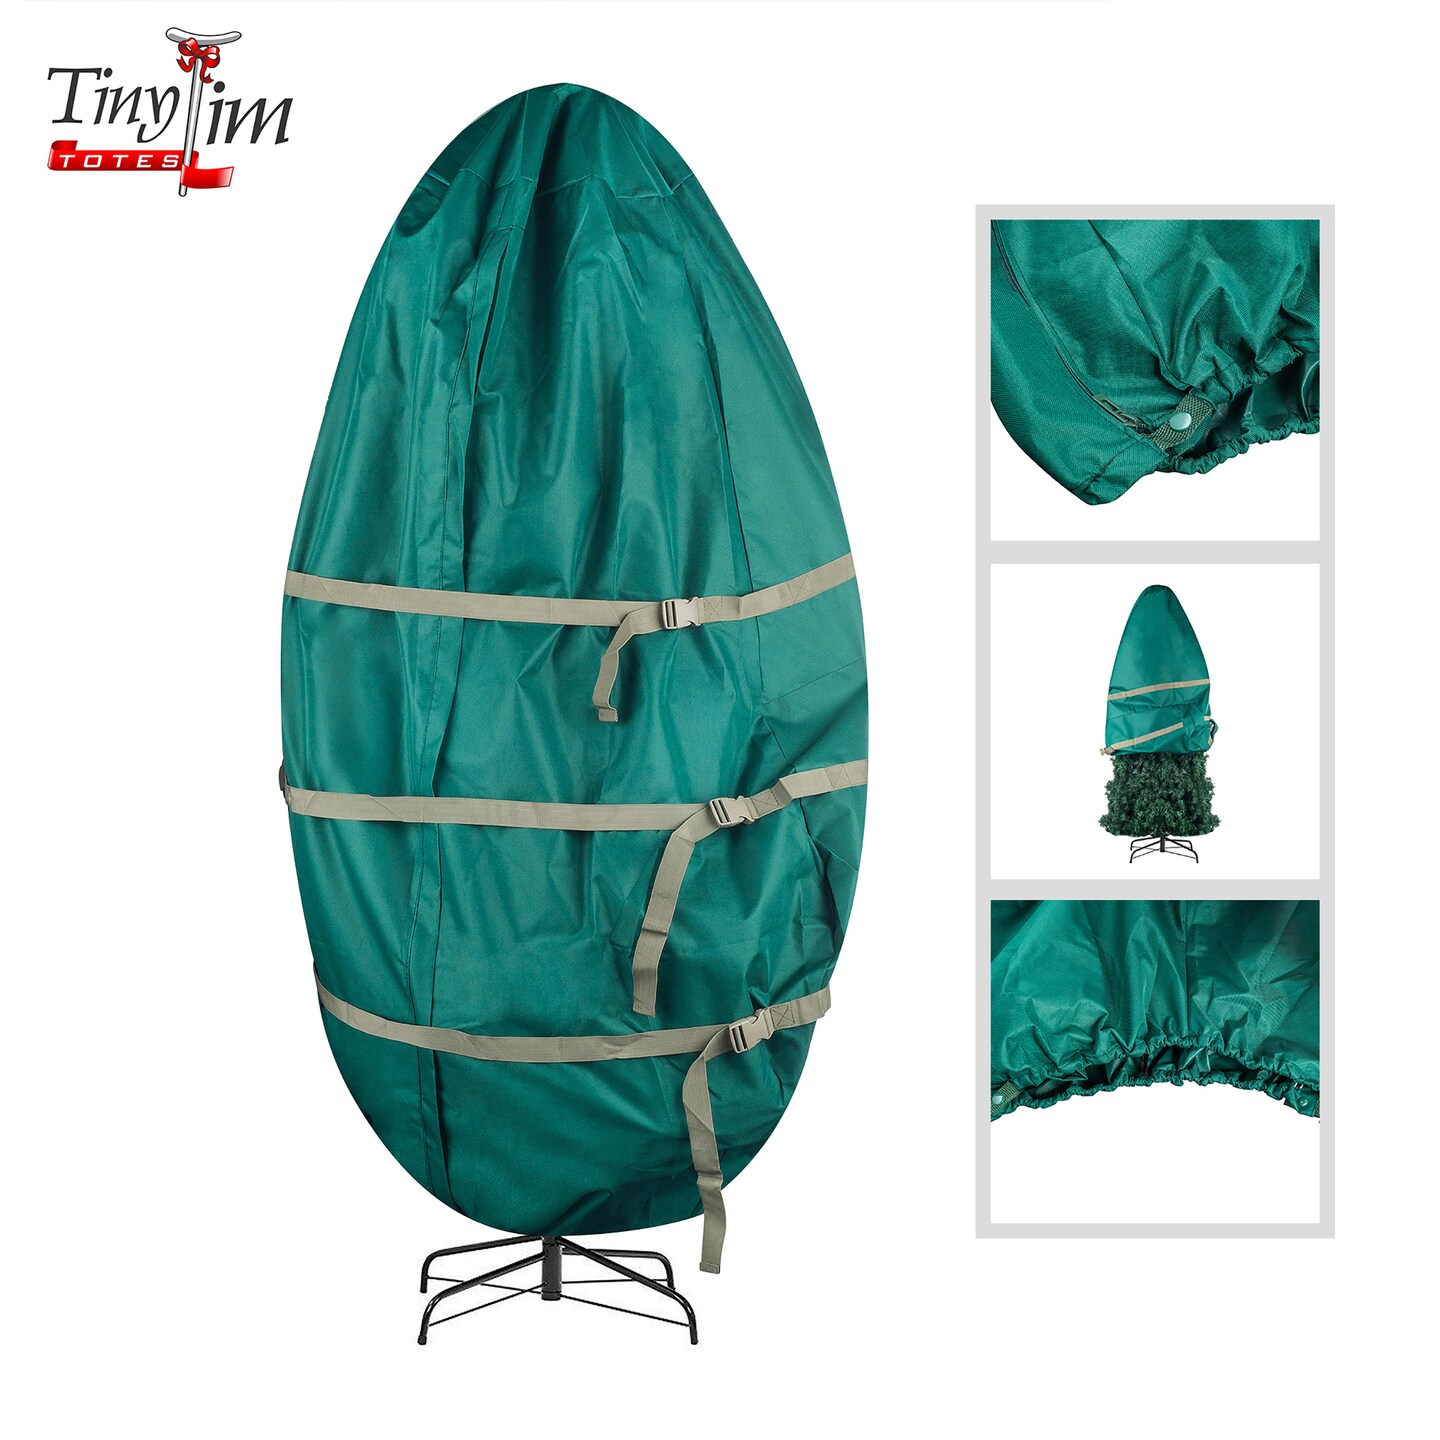 Tiny Tim Stand Up Christmas Tree Storage Bag Heavy Duty Canvas with Straps for Assembled Artificial Tree